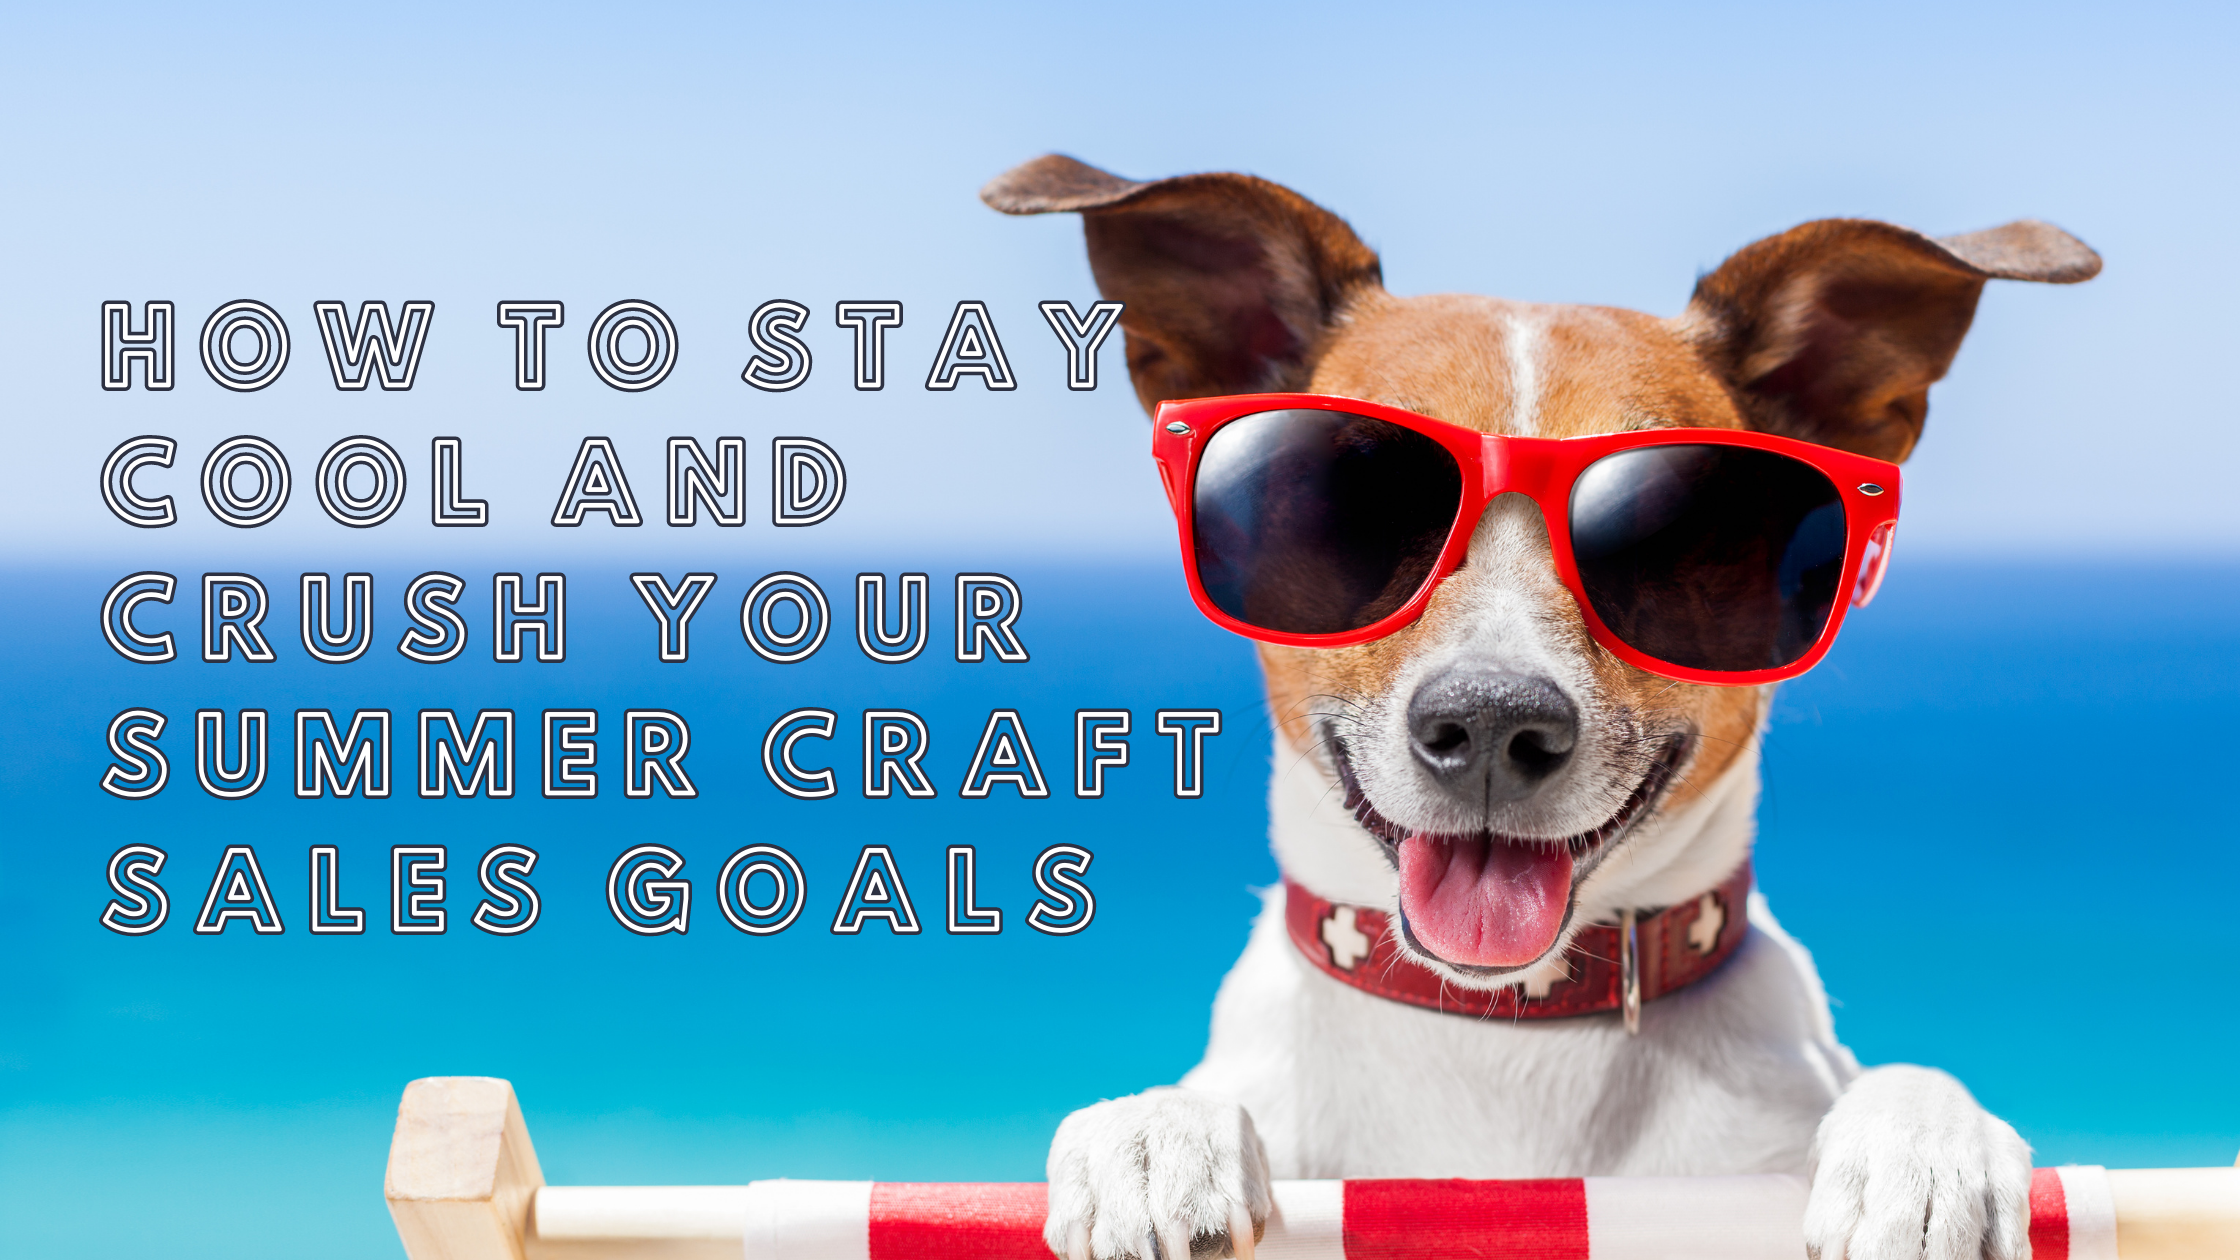 How to Stay Cool and Crush Your Summer Craft Sales Goals